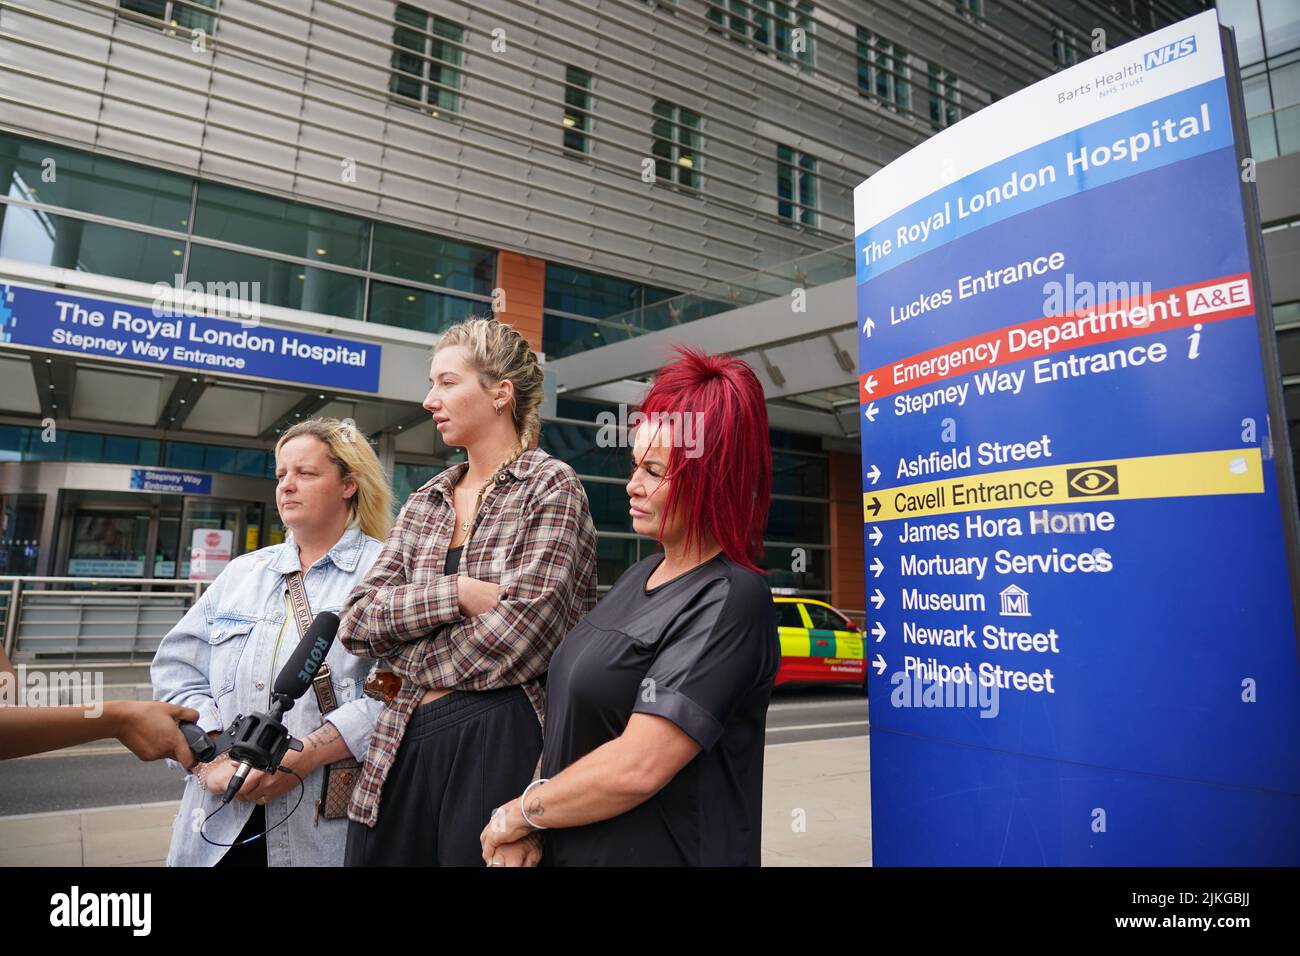 (left to right) Kelly Elliott, Ella Carter, and Jeanette Baldwin, friends of the family of Archie Battersbee, speaking to the media outside the Royal London hospital in Whitechapel, east London. The parents of Archie Battersbee have filed an application to the Supreme Court in a bid to extend his life-sustaining treatment to allow time for a United Nations committee to consider the 12-year-old's case. Picture date: Tuesday August 2, 2022. Stock Photo